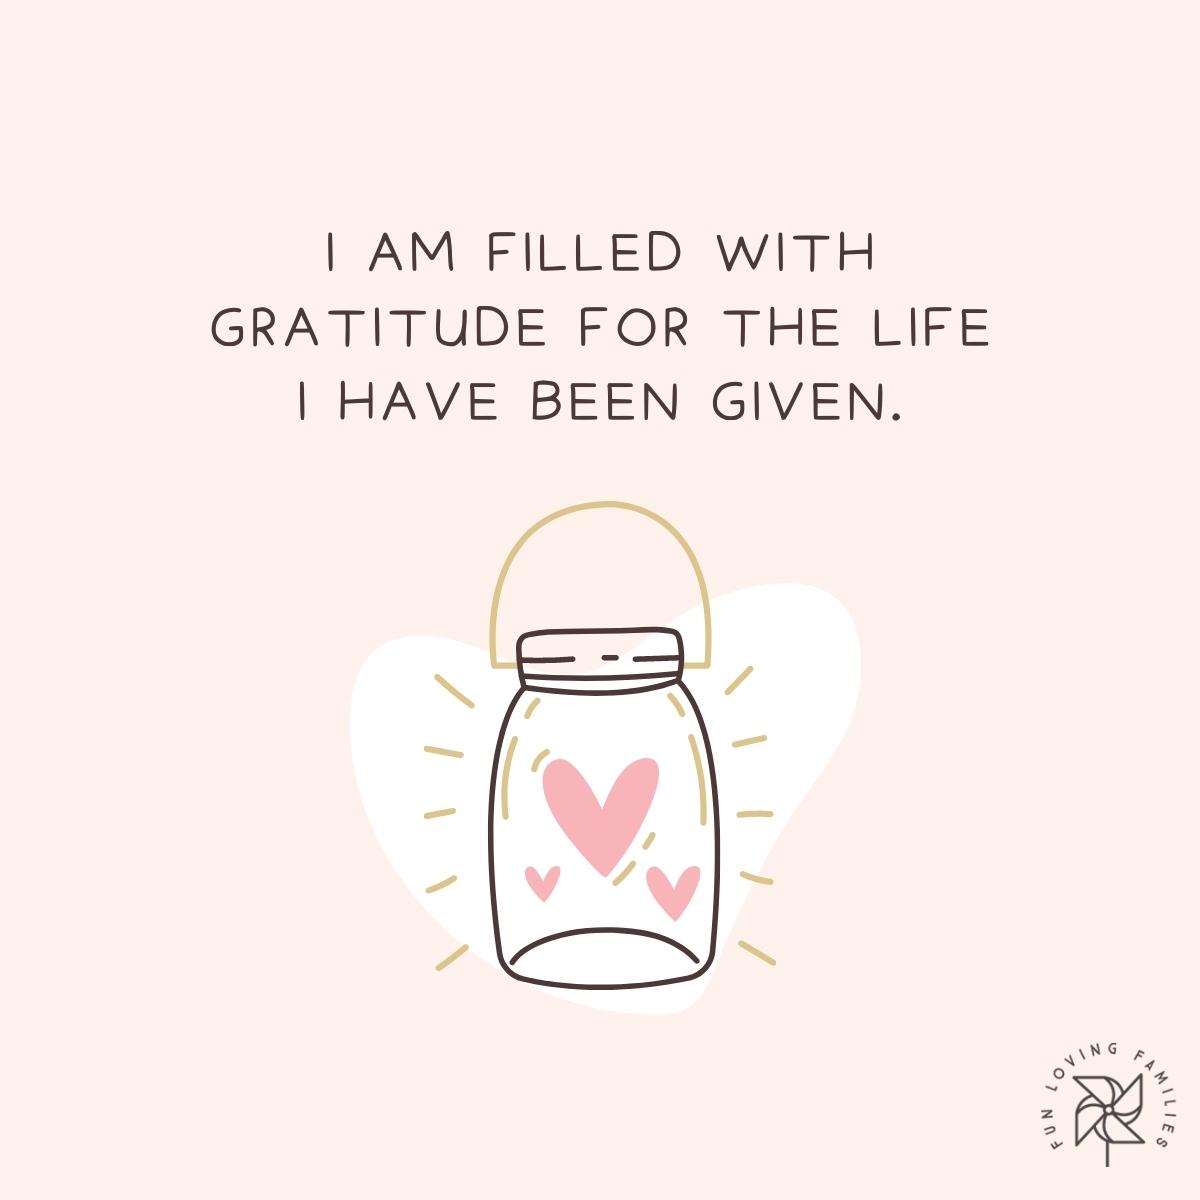 I am filled with gratitude for the life I have been given affirmation